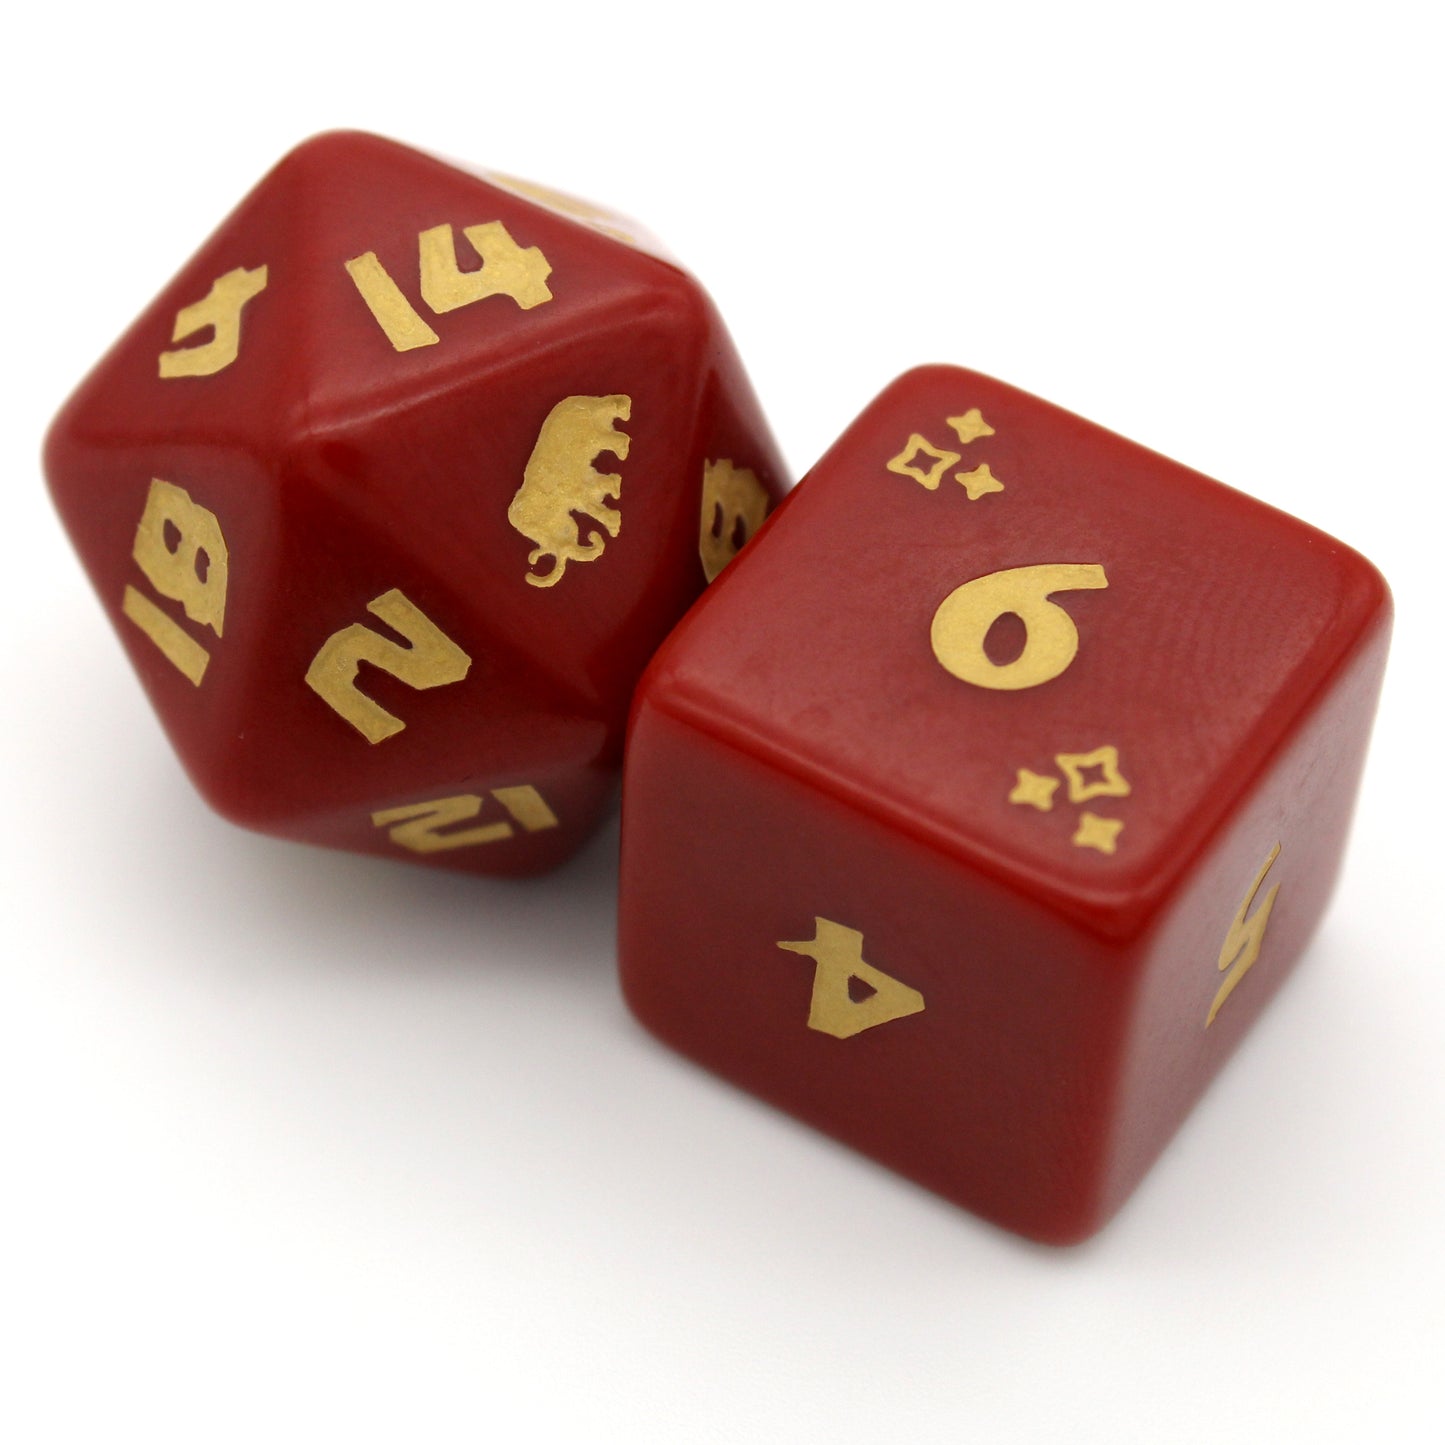 Woolly is an 8-piece engraved acrylic set in antique rust red with mammoth transformation icons inked in fossil tan. Included is an alternate d20 in reverse colors.